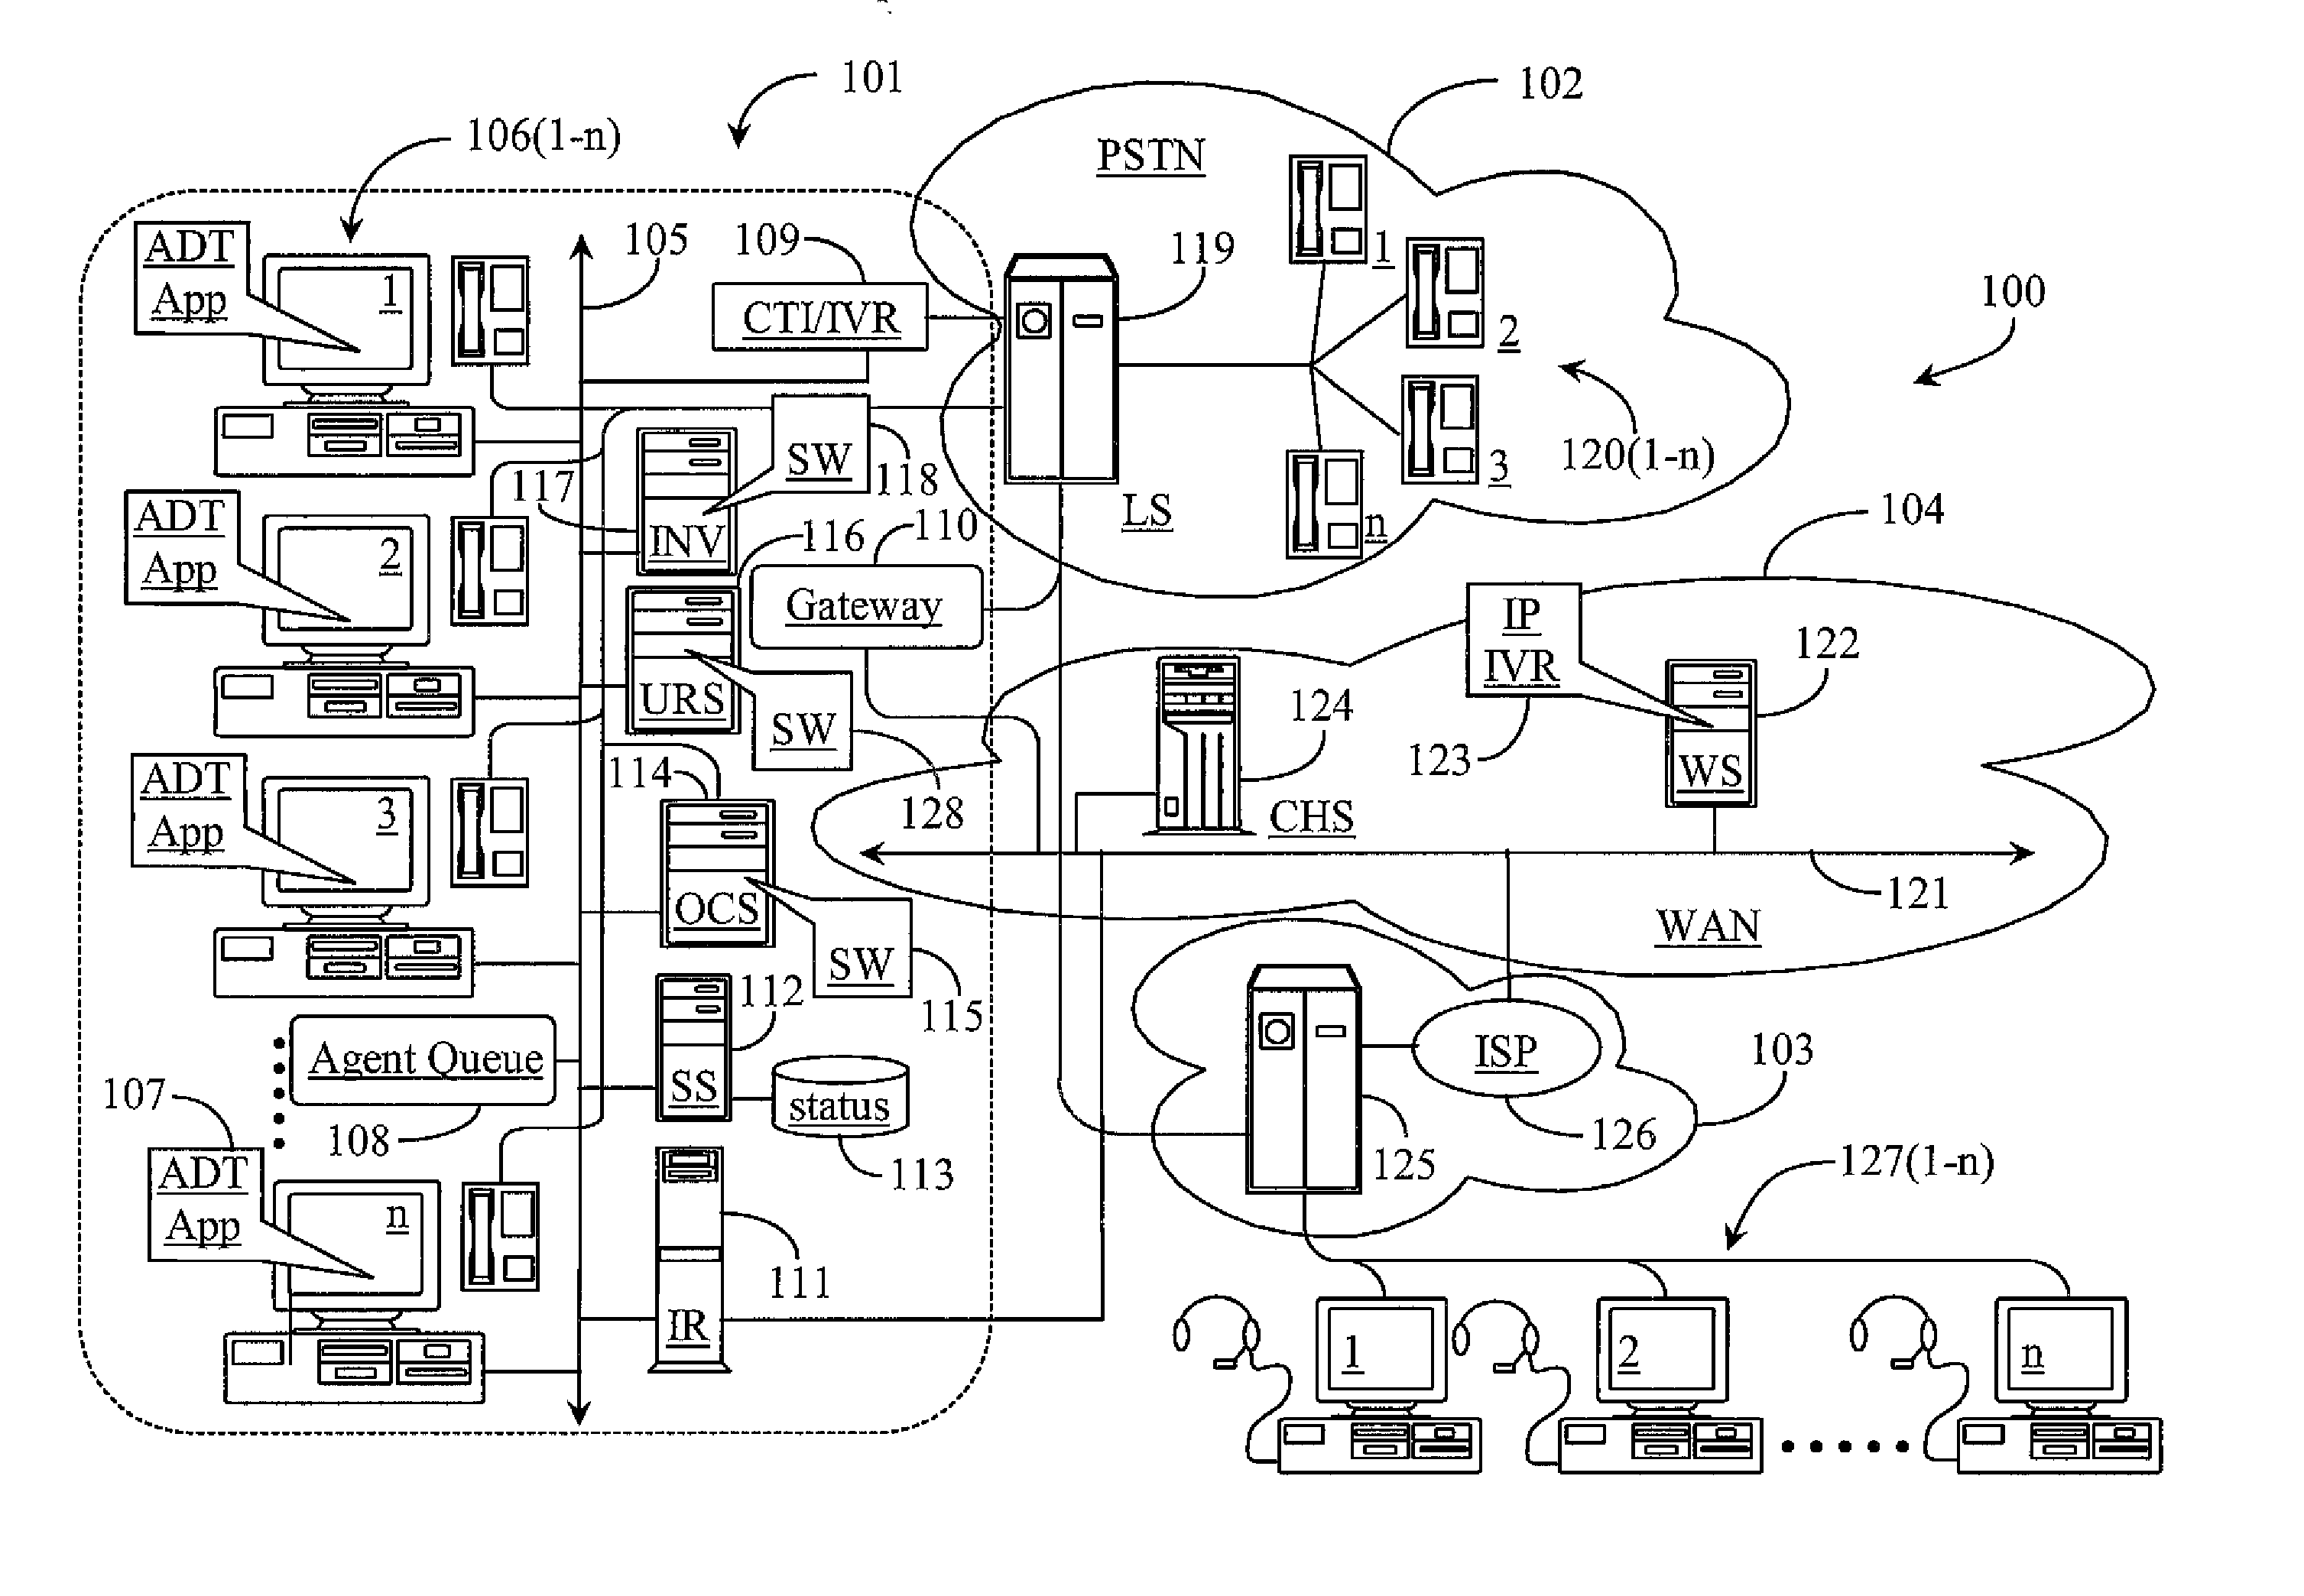 System and Methods for Predicting Future Agent Readiness for Handling an Interaction in a Call Center